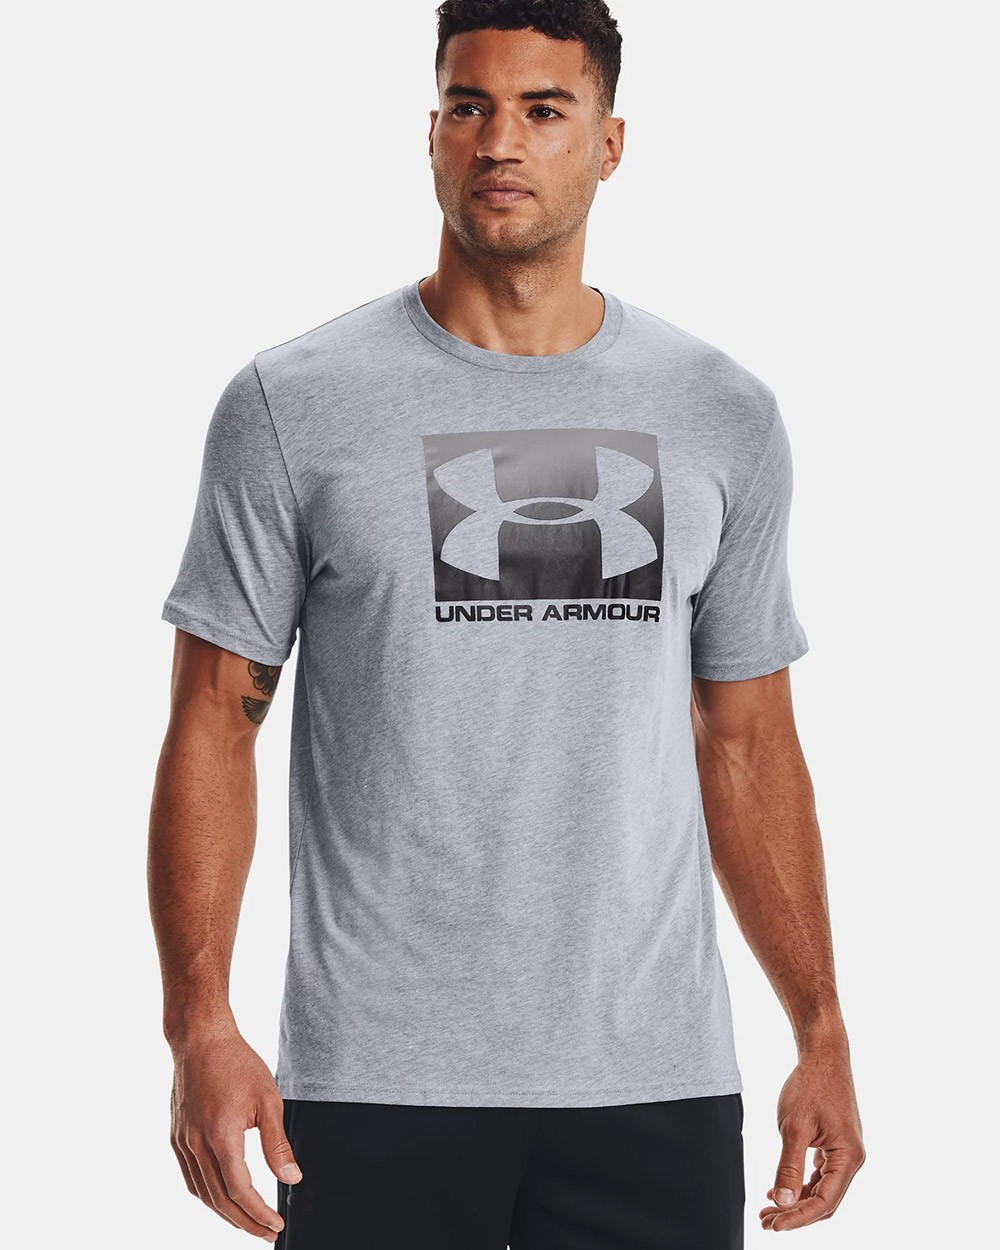 Sportstyle T-Shirt - ARMOR UNDER Boxed